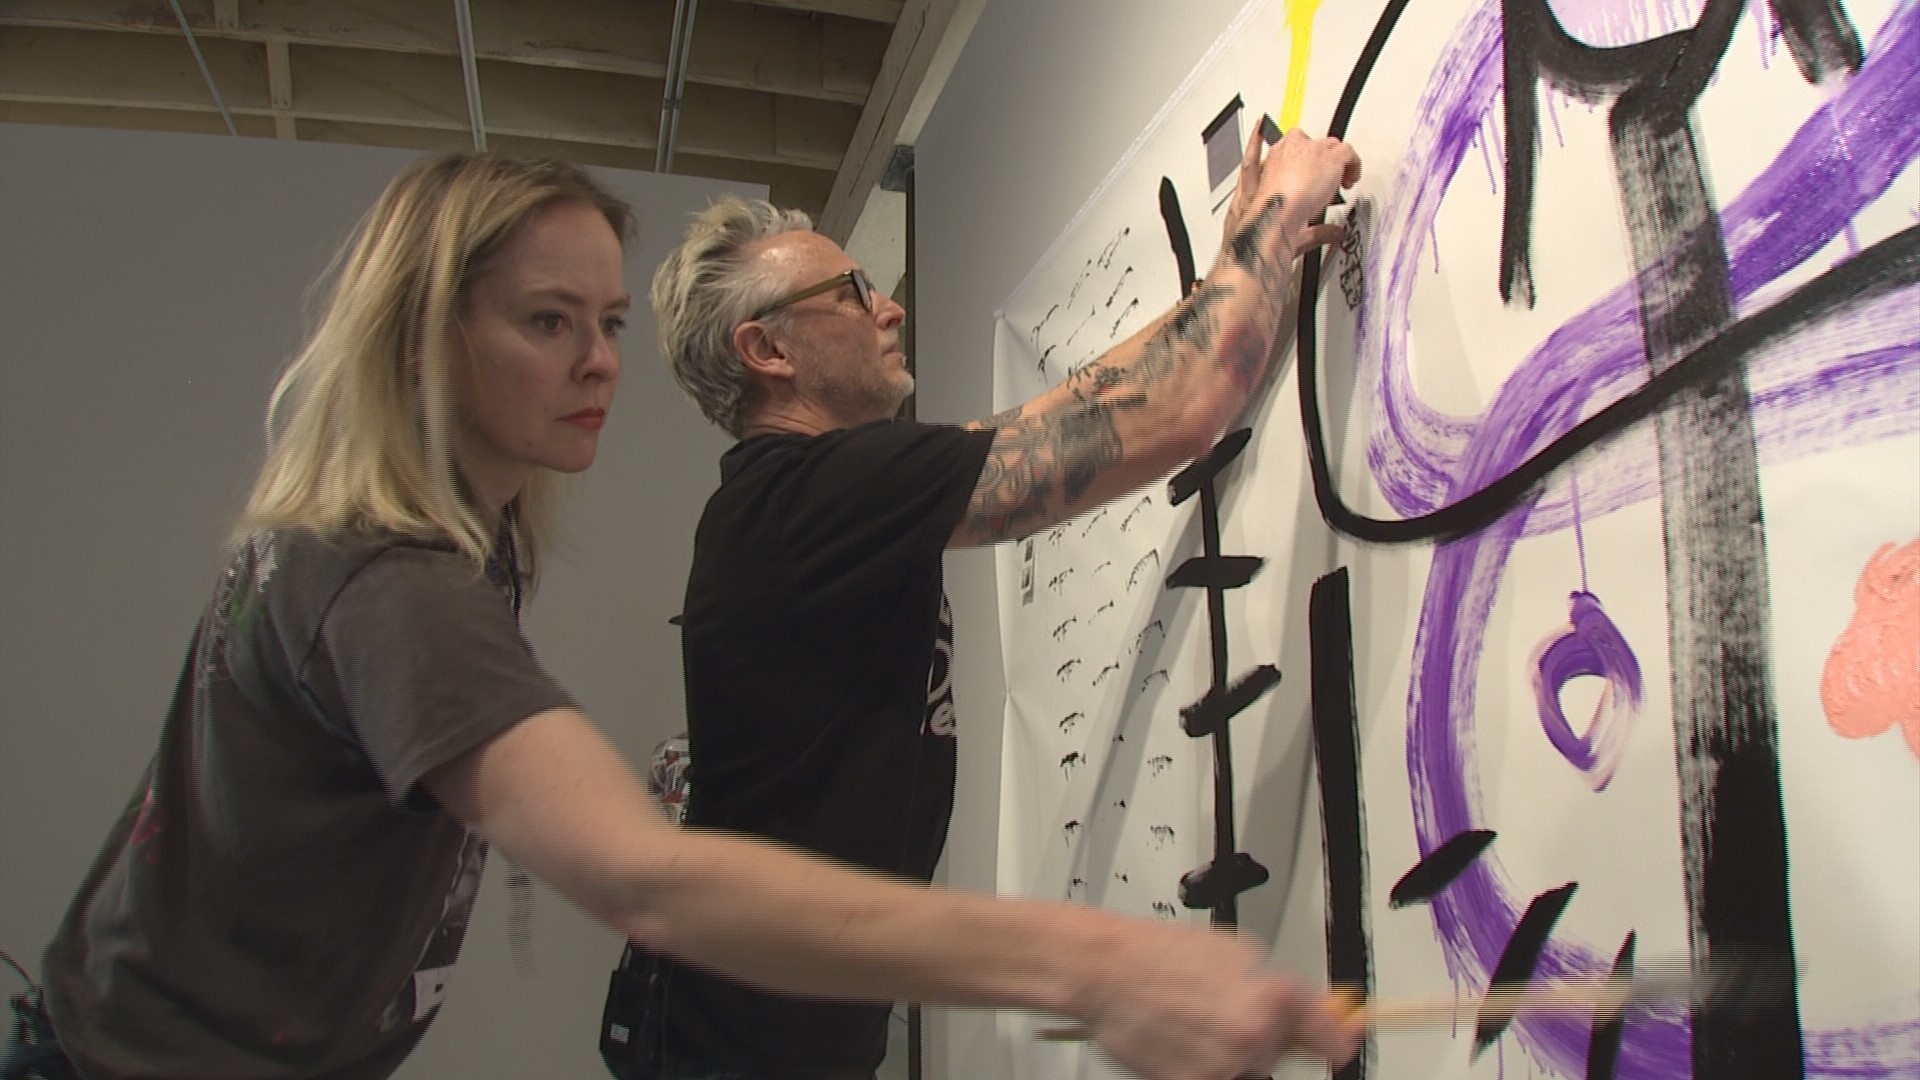 Mike McCready teams up with artist Kate Neckel to create his first premiere art exhibition